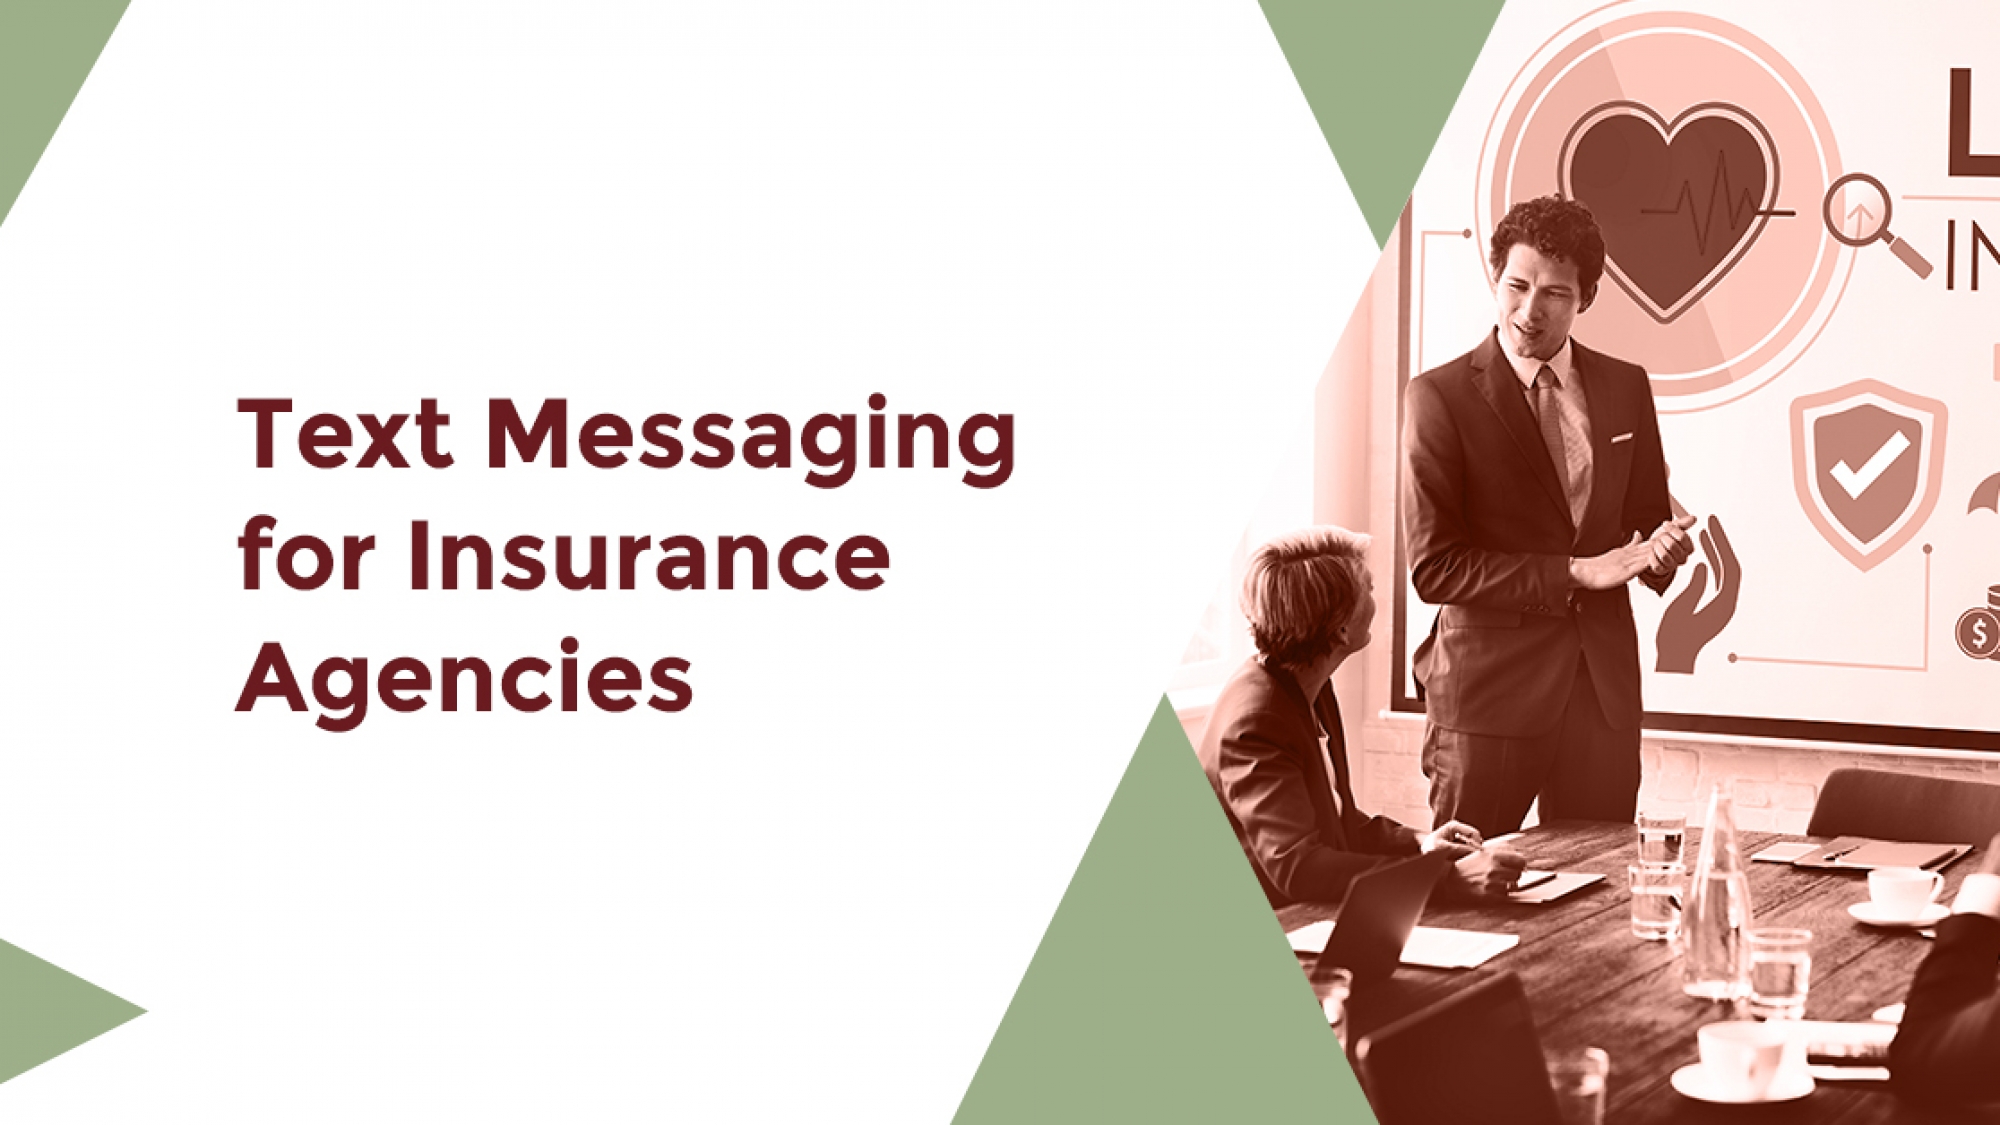 Business Text Messaging With attachments For Insurance Agencies | Redtie